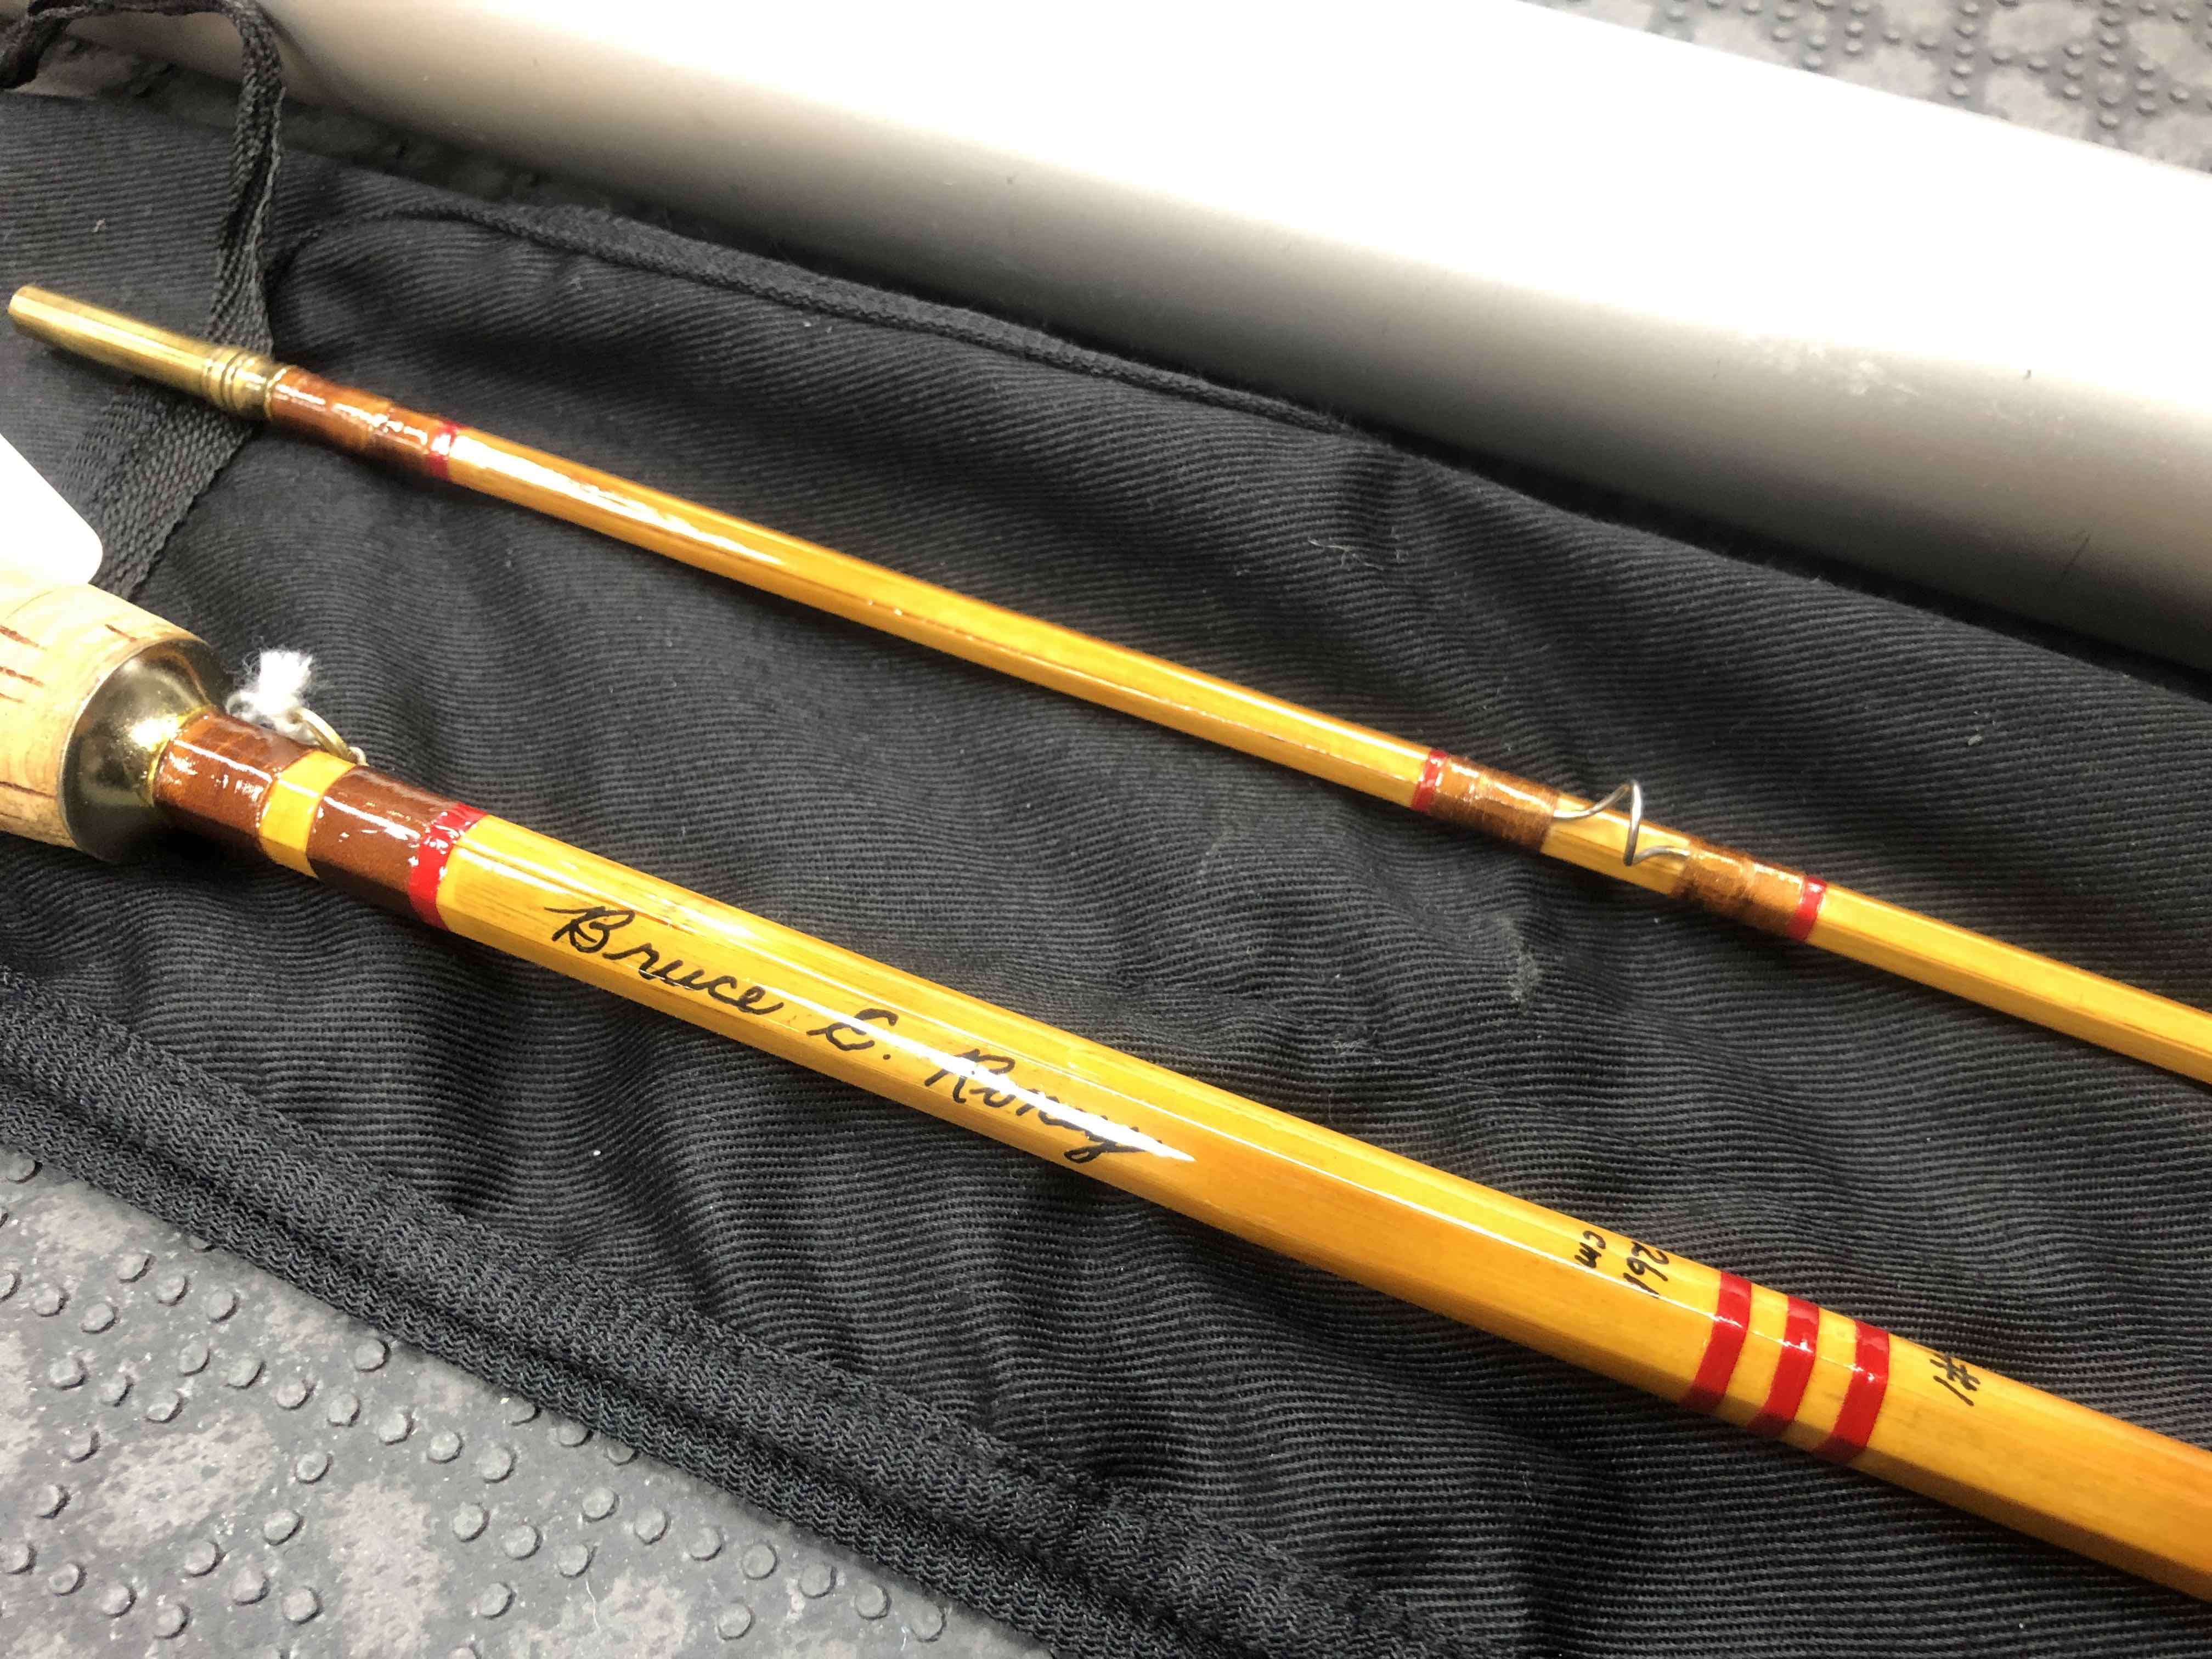 https://thefirstcast.ca/wp-content/uploads/2019/04/Bamboo-Cane-Rod-Fly-Rod-Built-by-owner-From-Genuine-Tonkin-Cane-in-1975-2piece-9foot-5weight-Dry-Fly-Action-comes-with-Sock-and-Aluminum-Tube-BB.jpg